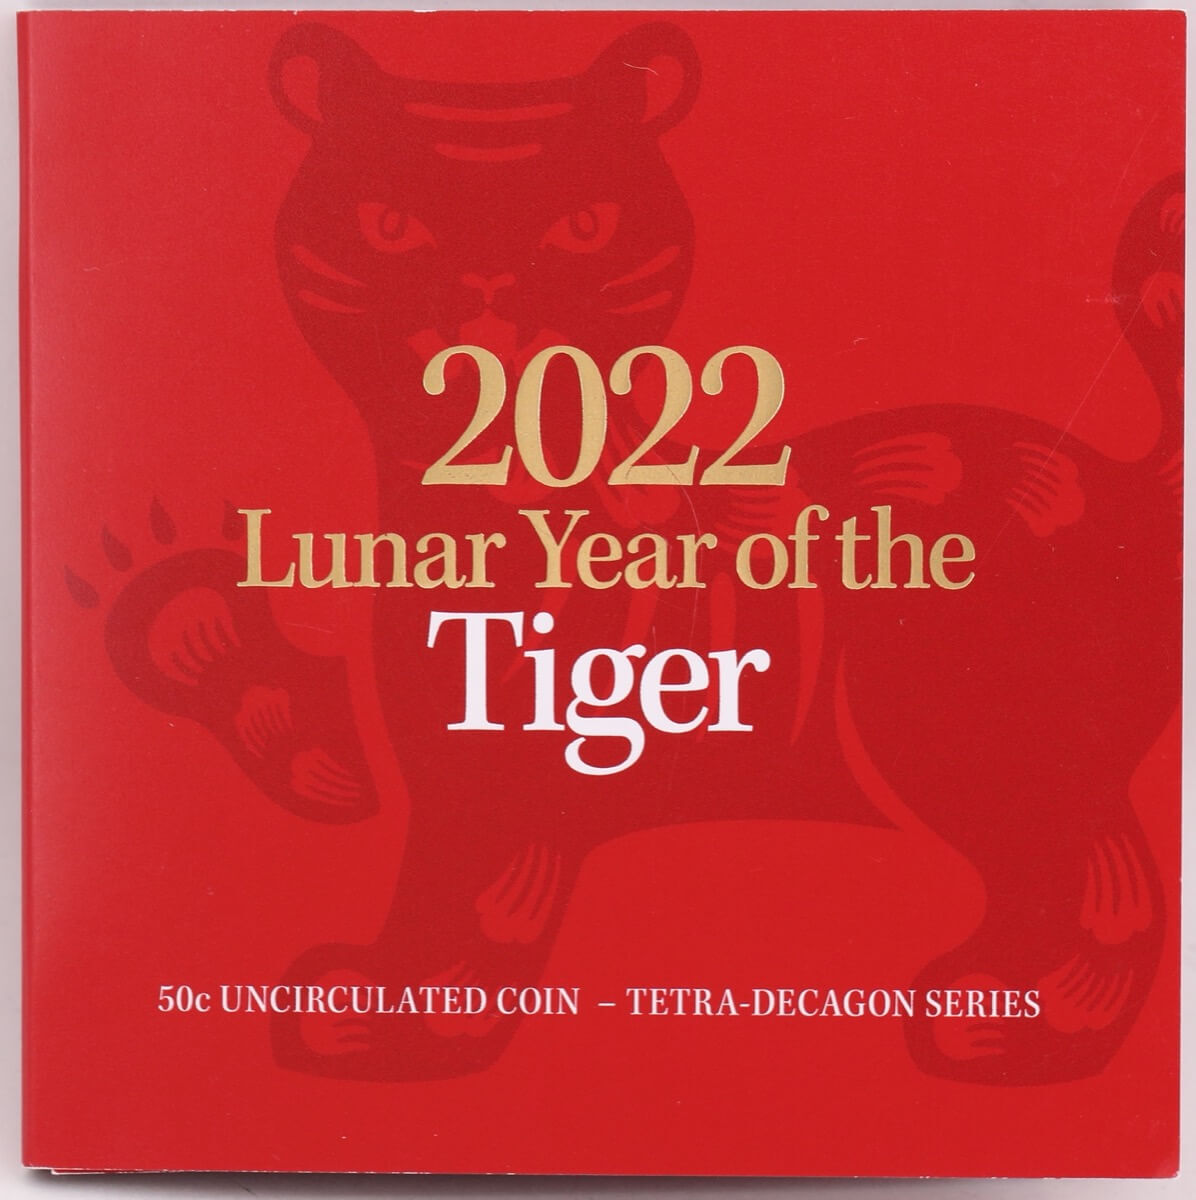 2022 Uncirculated Tetradecagon 50 Cent Coin Year of the Tiger product image